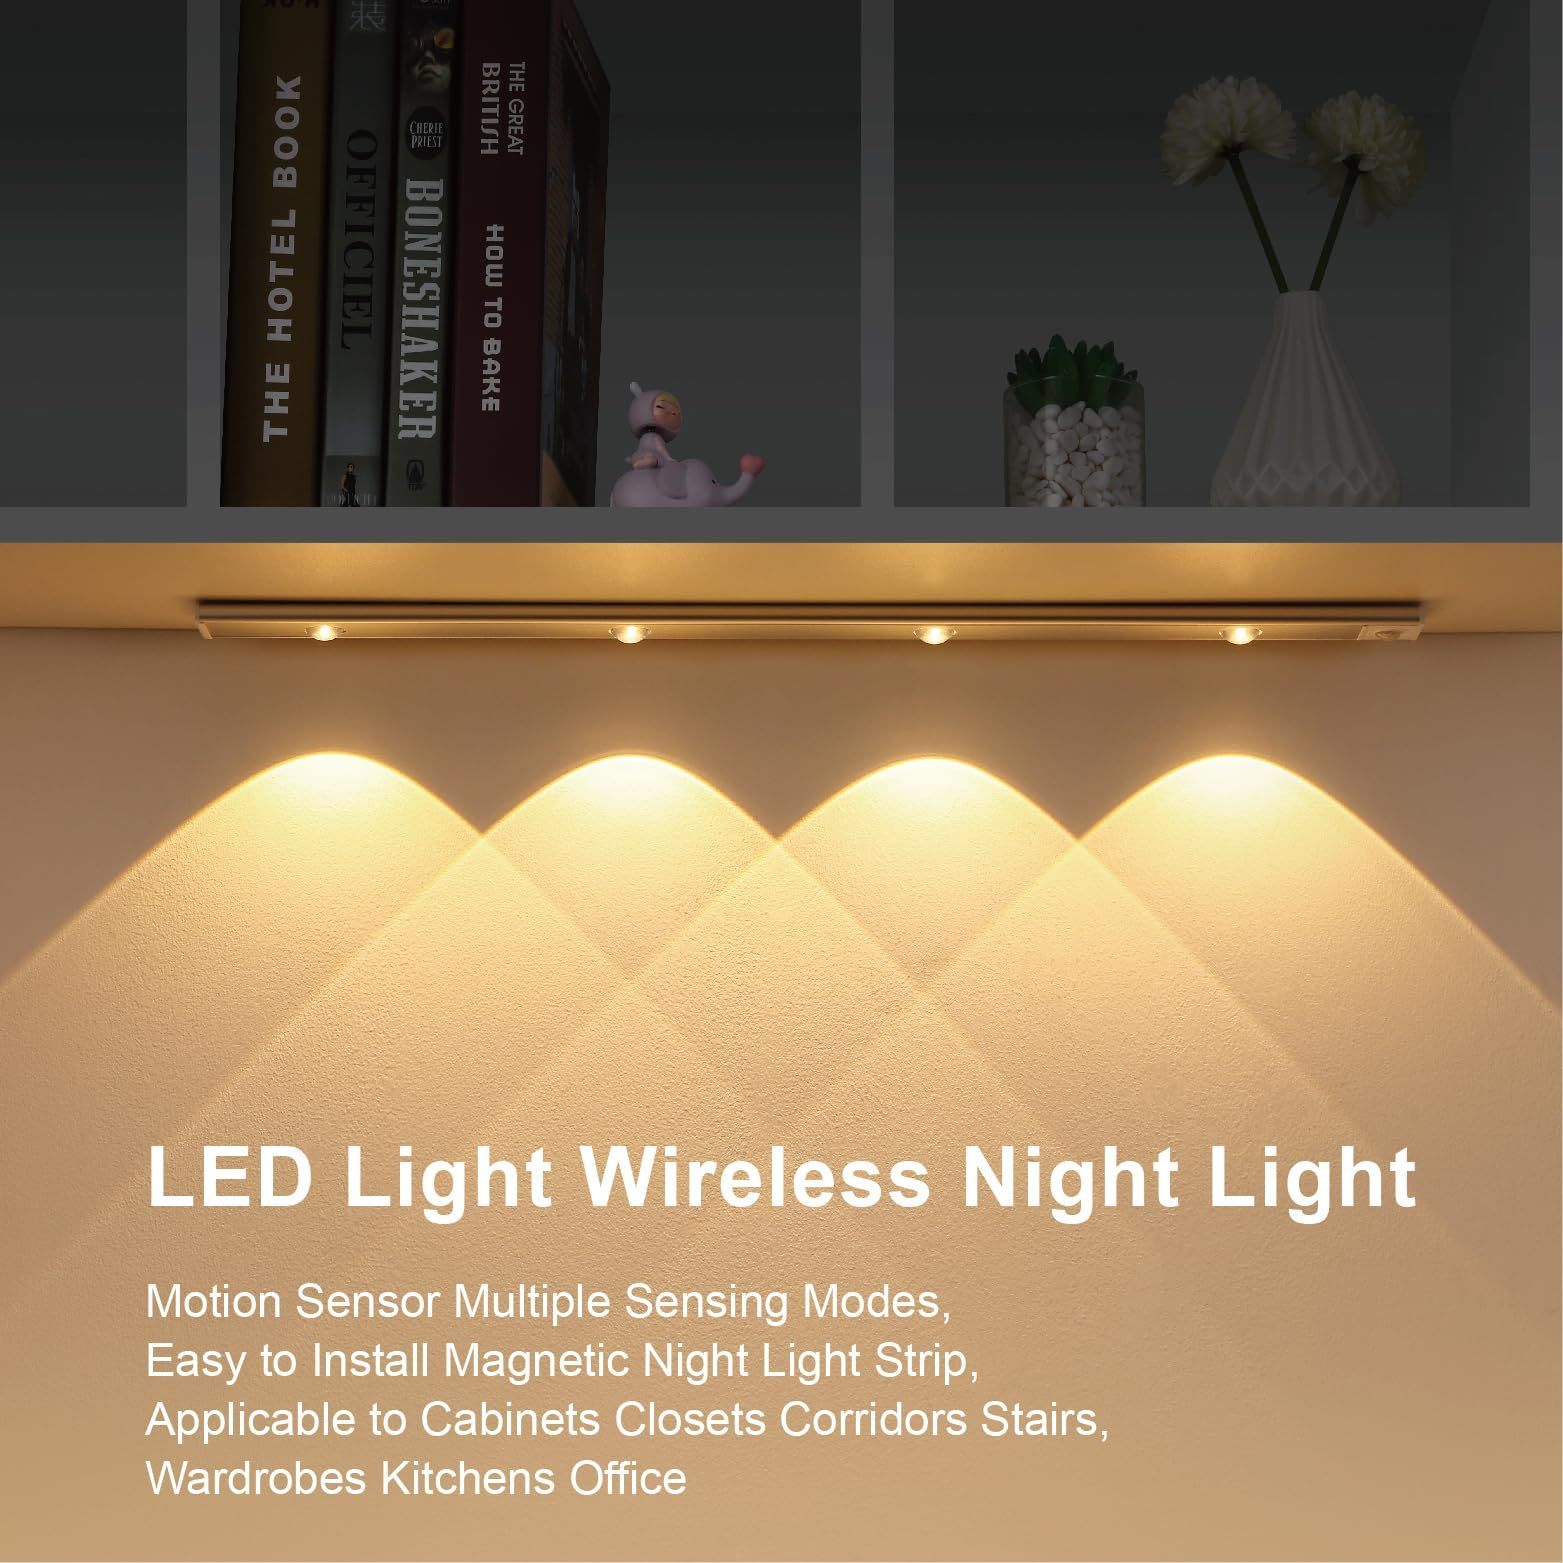 Led Round Lights, Motion Sensor Lighting Night Light, Wireless Cupboard  Magnetic Lights, Battery Operated With Usb, For Under Cabinet, Kitchen,  Stairs